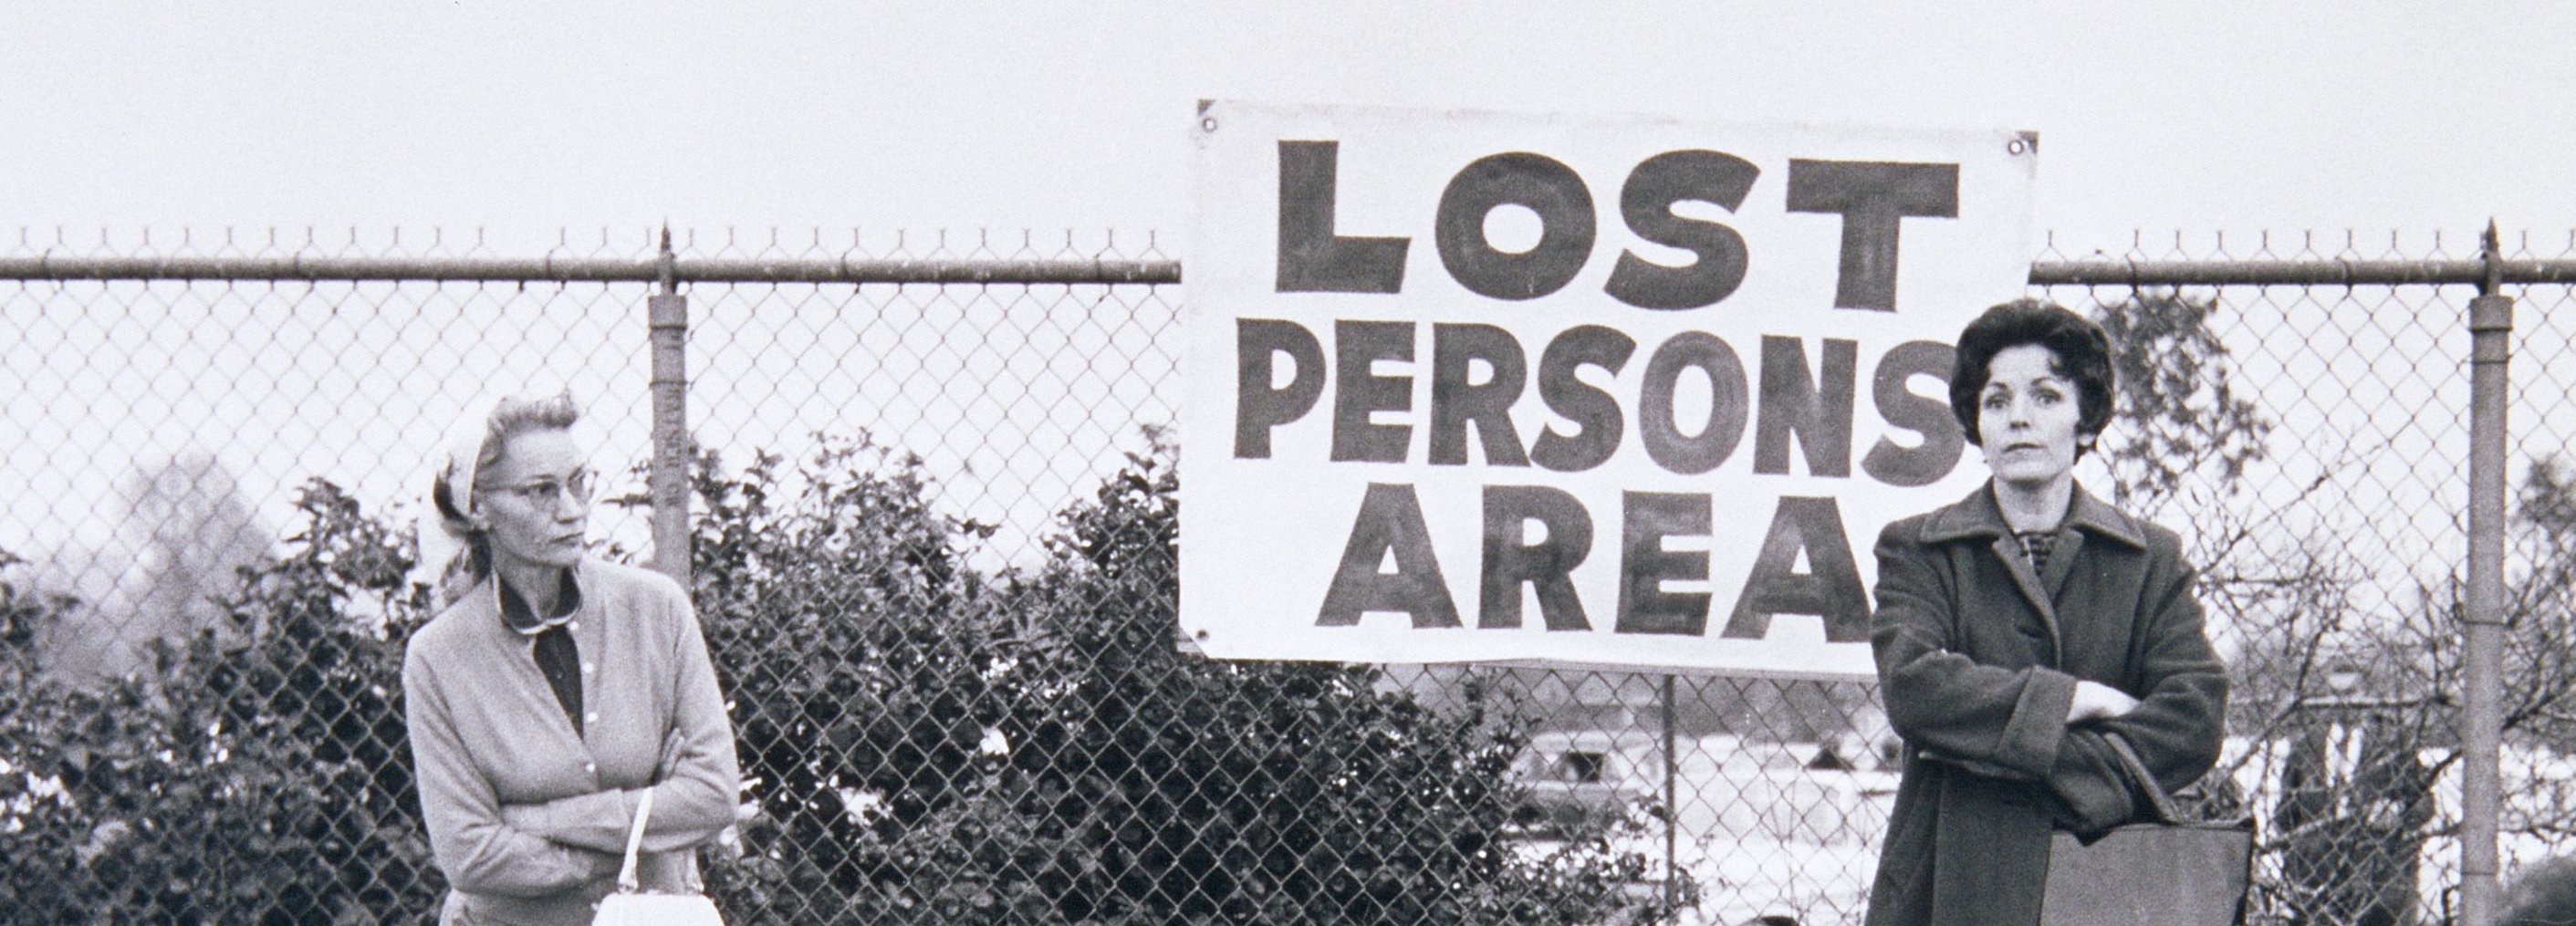 a black and white photo of several women standing beside a chainlink fence and a handmade sign which reads "Lost Persons Area"